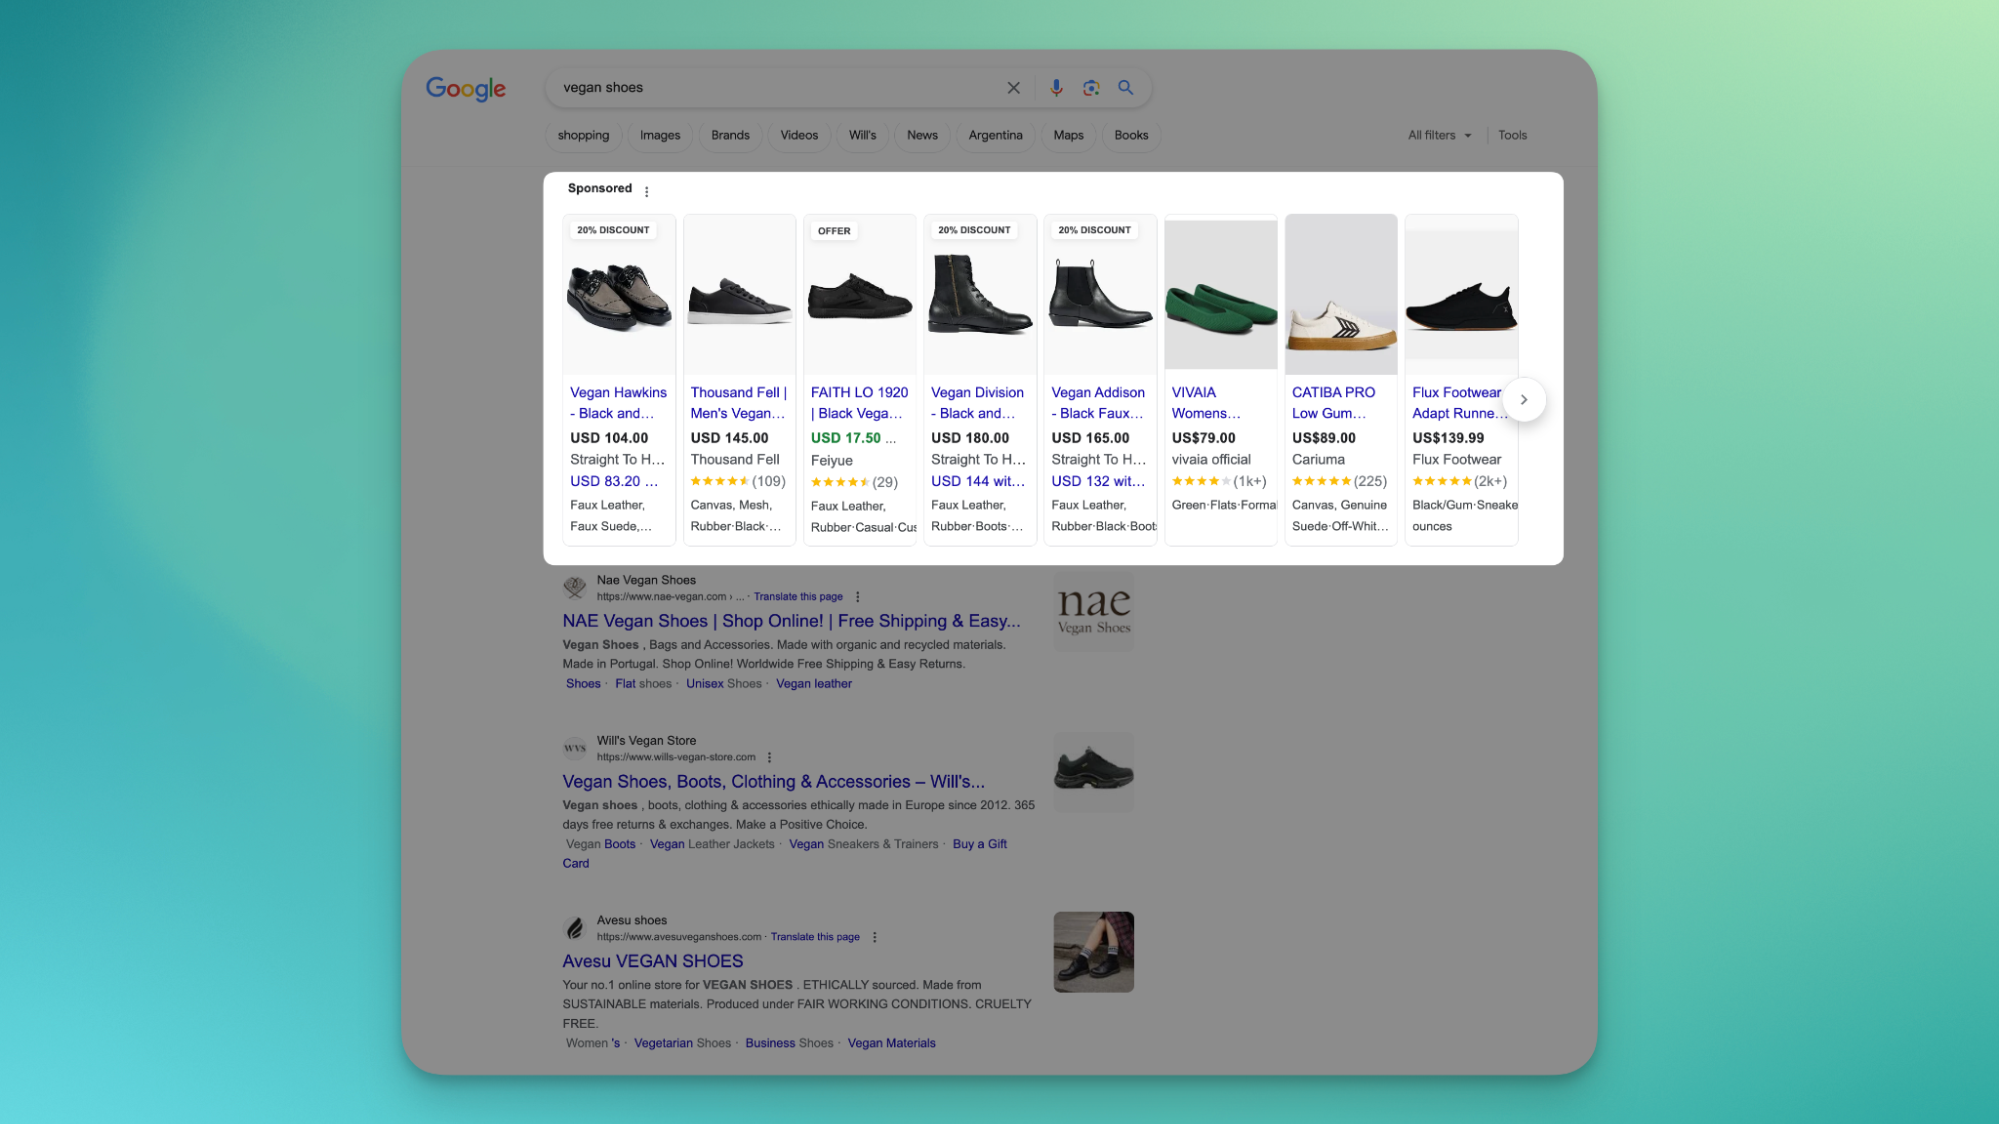 Google search results for the query “vegan shoes” with highlighted paid search options